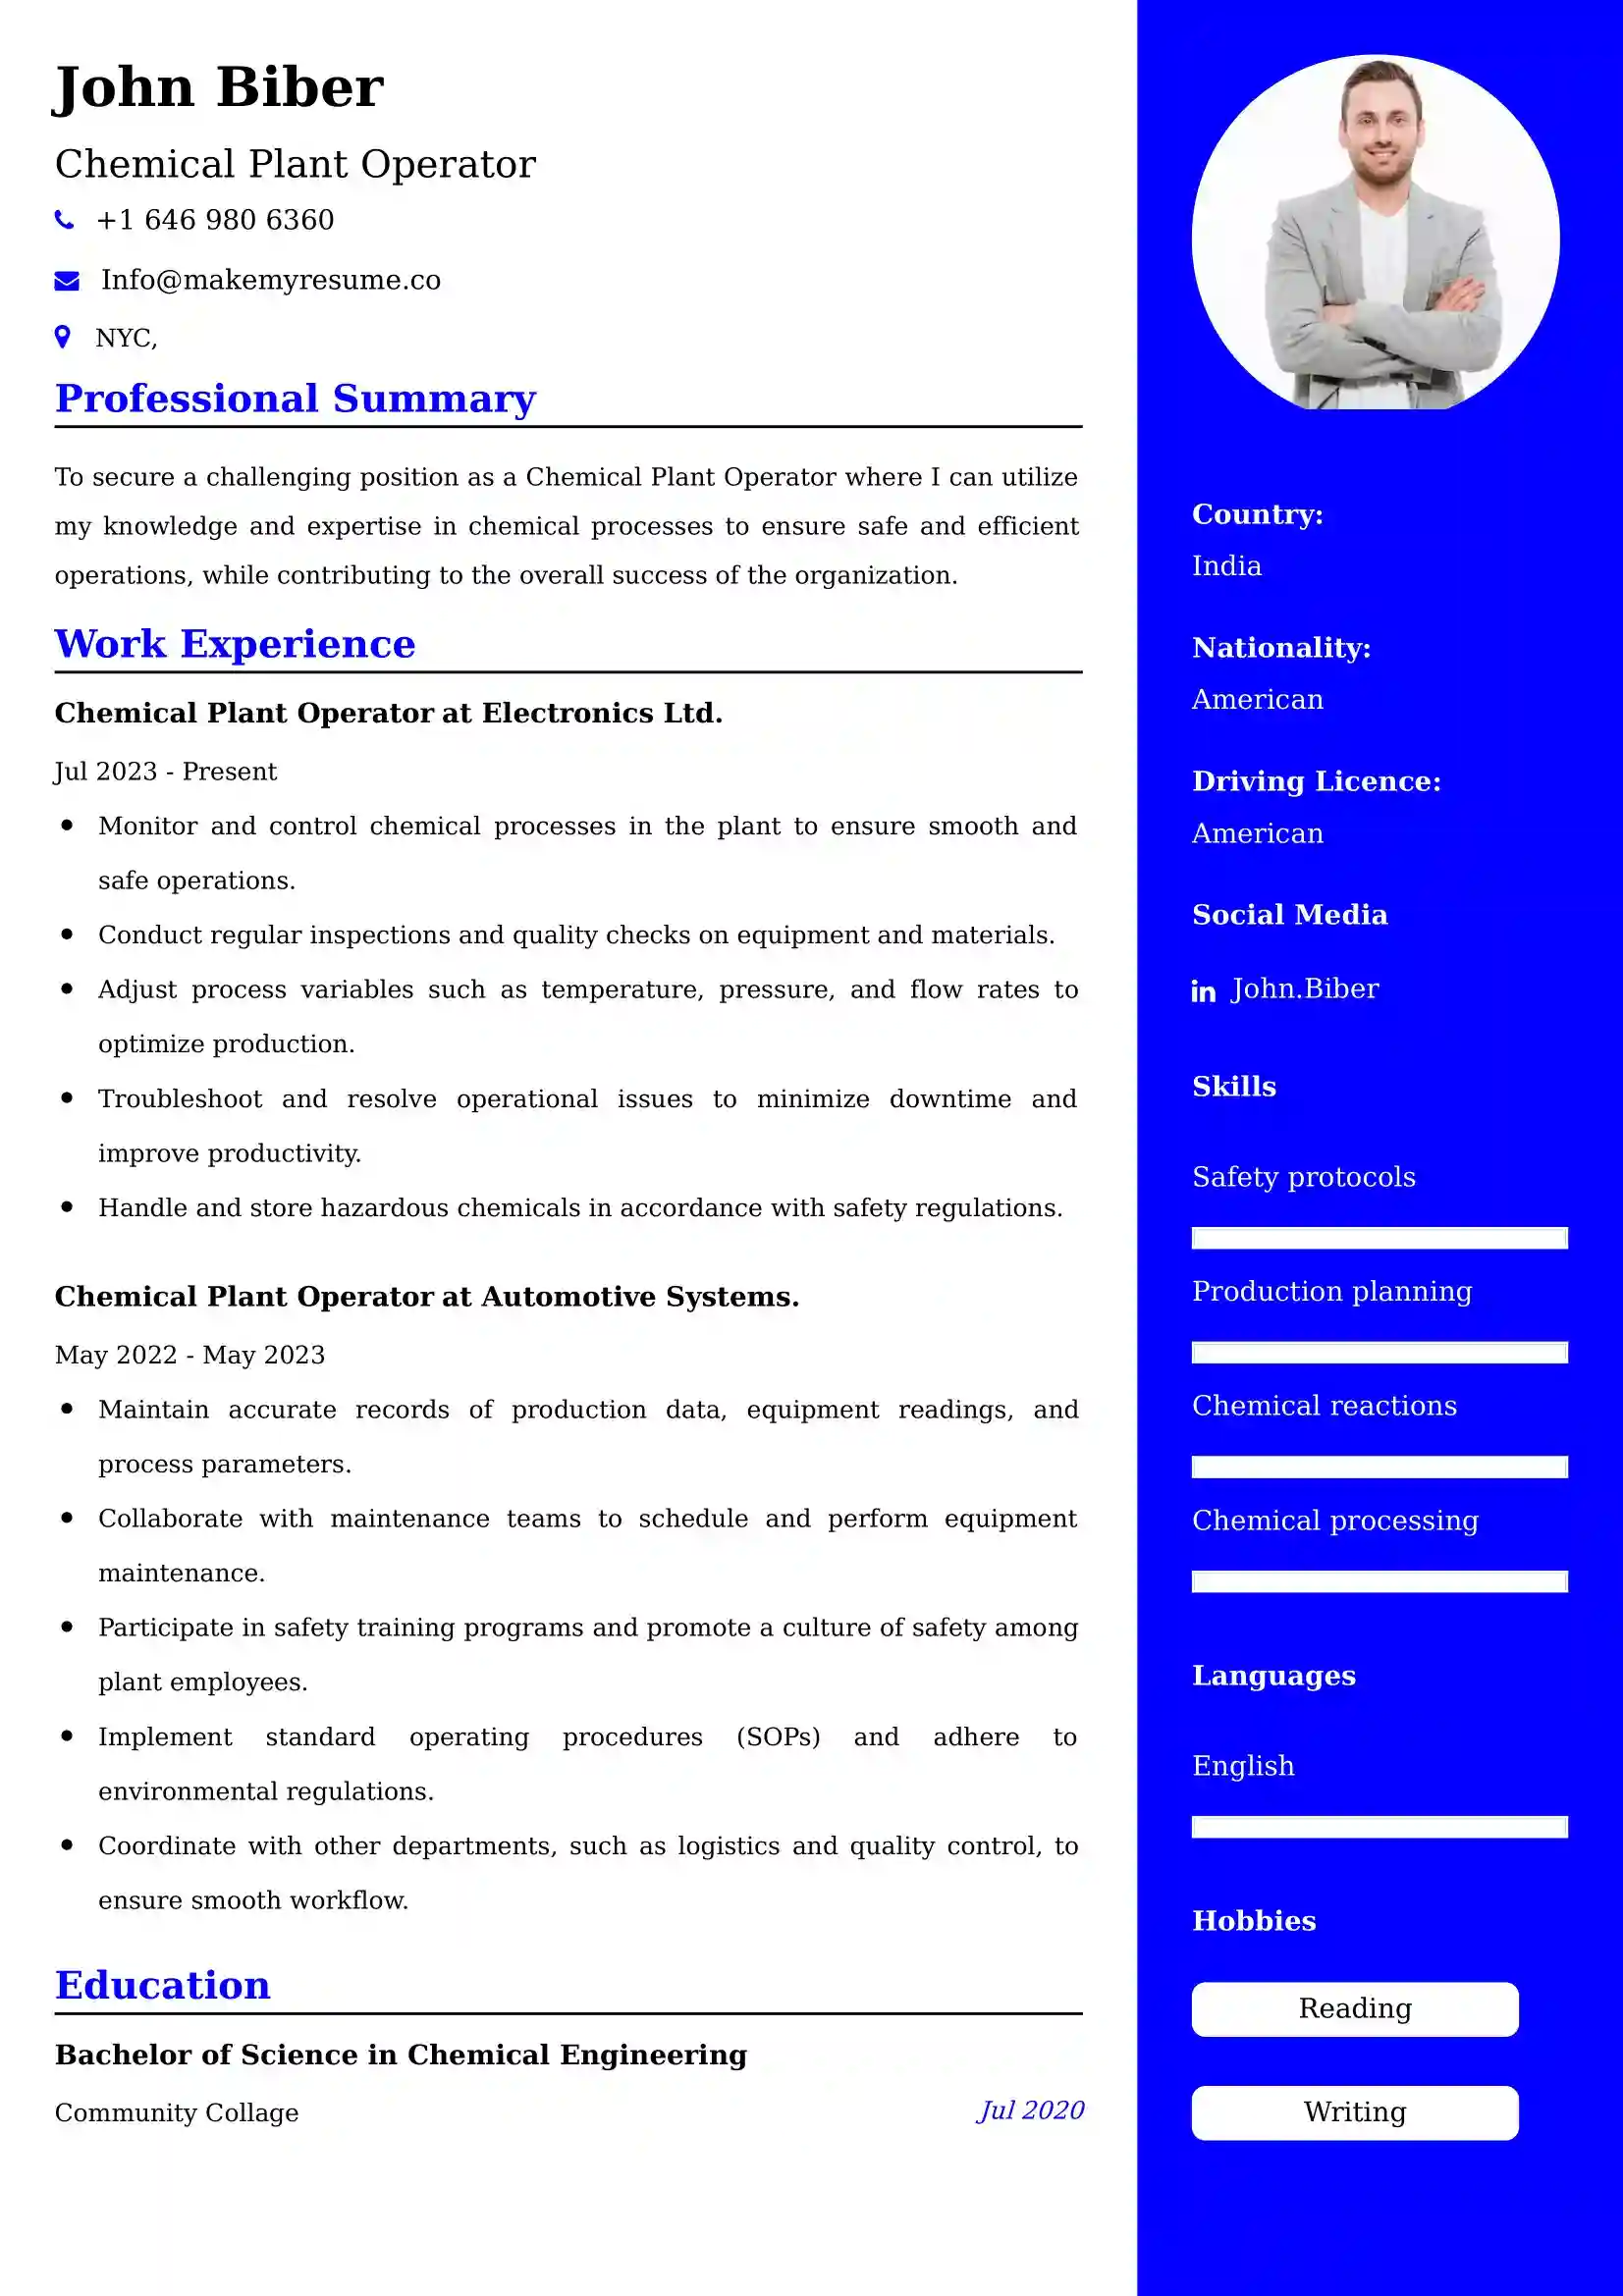 Best Chemical Plant Operator Resume Examples for UK